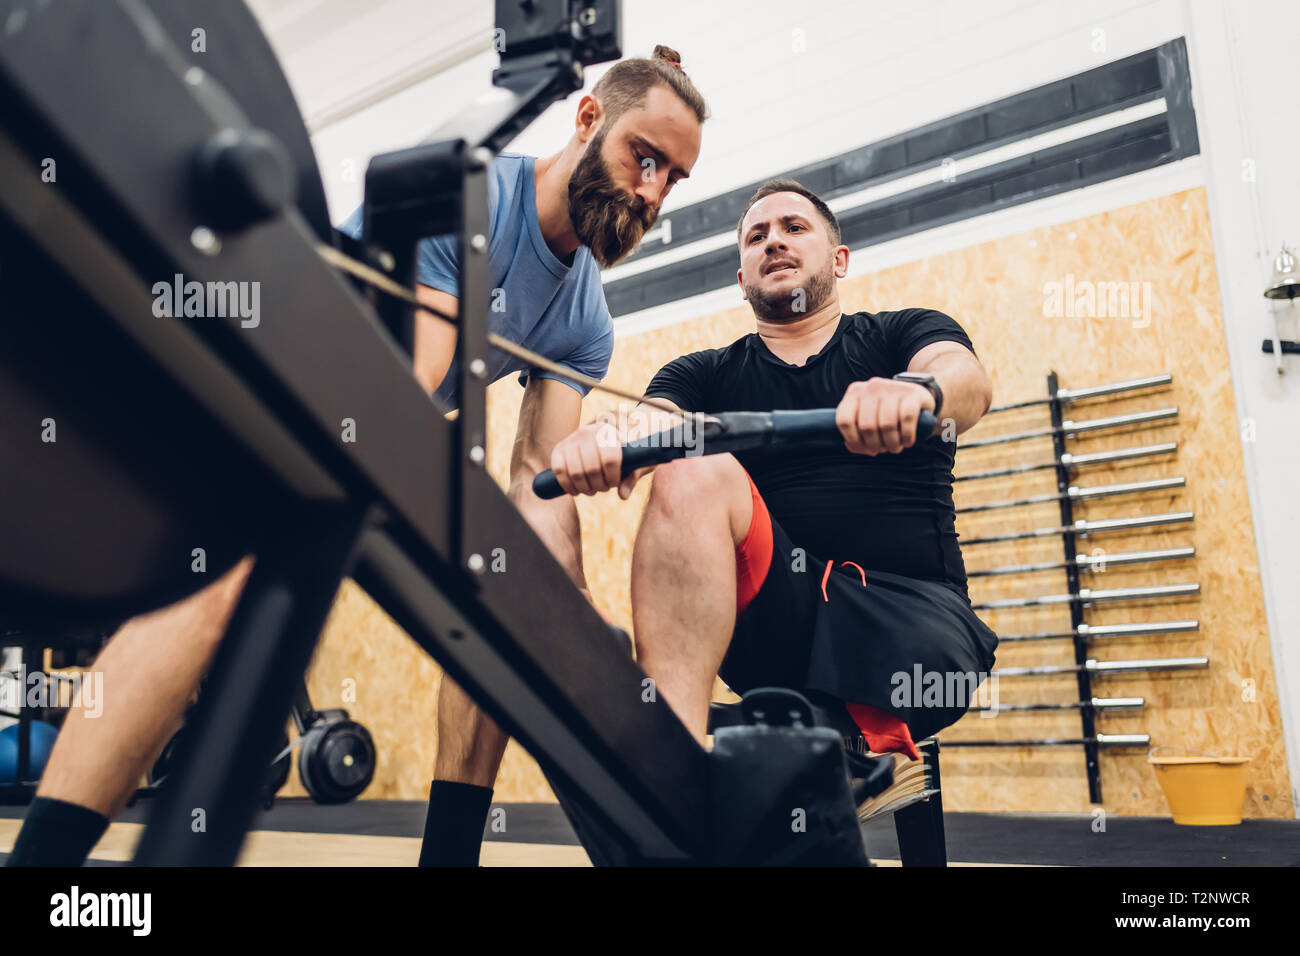 Personal trainer working with man with disability on rowing machine Stock Photo